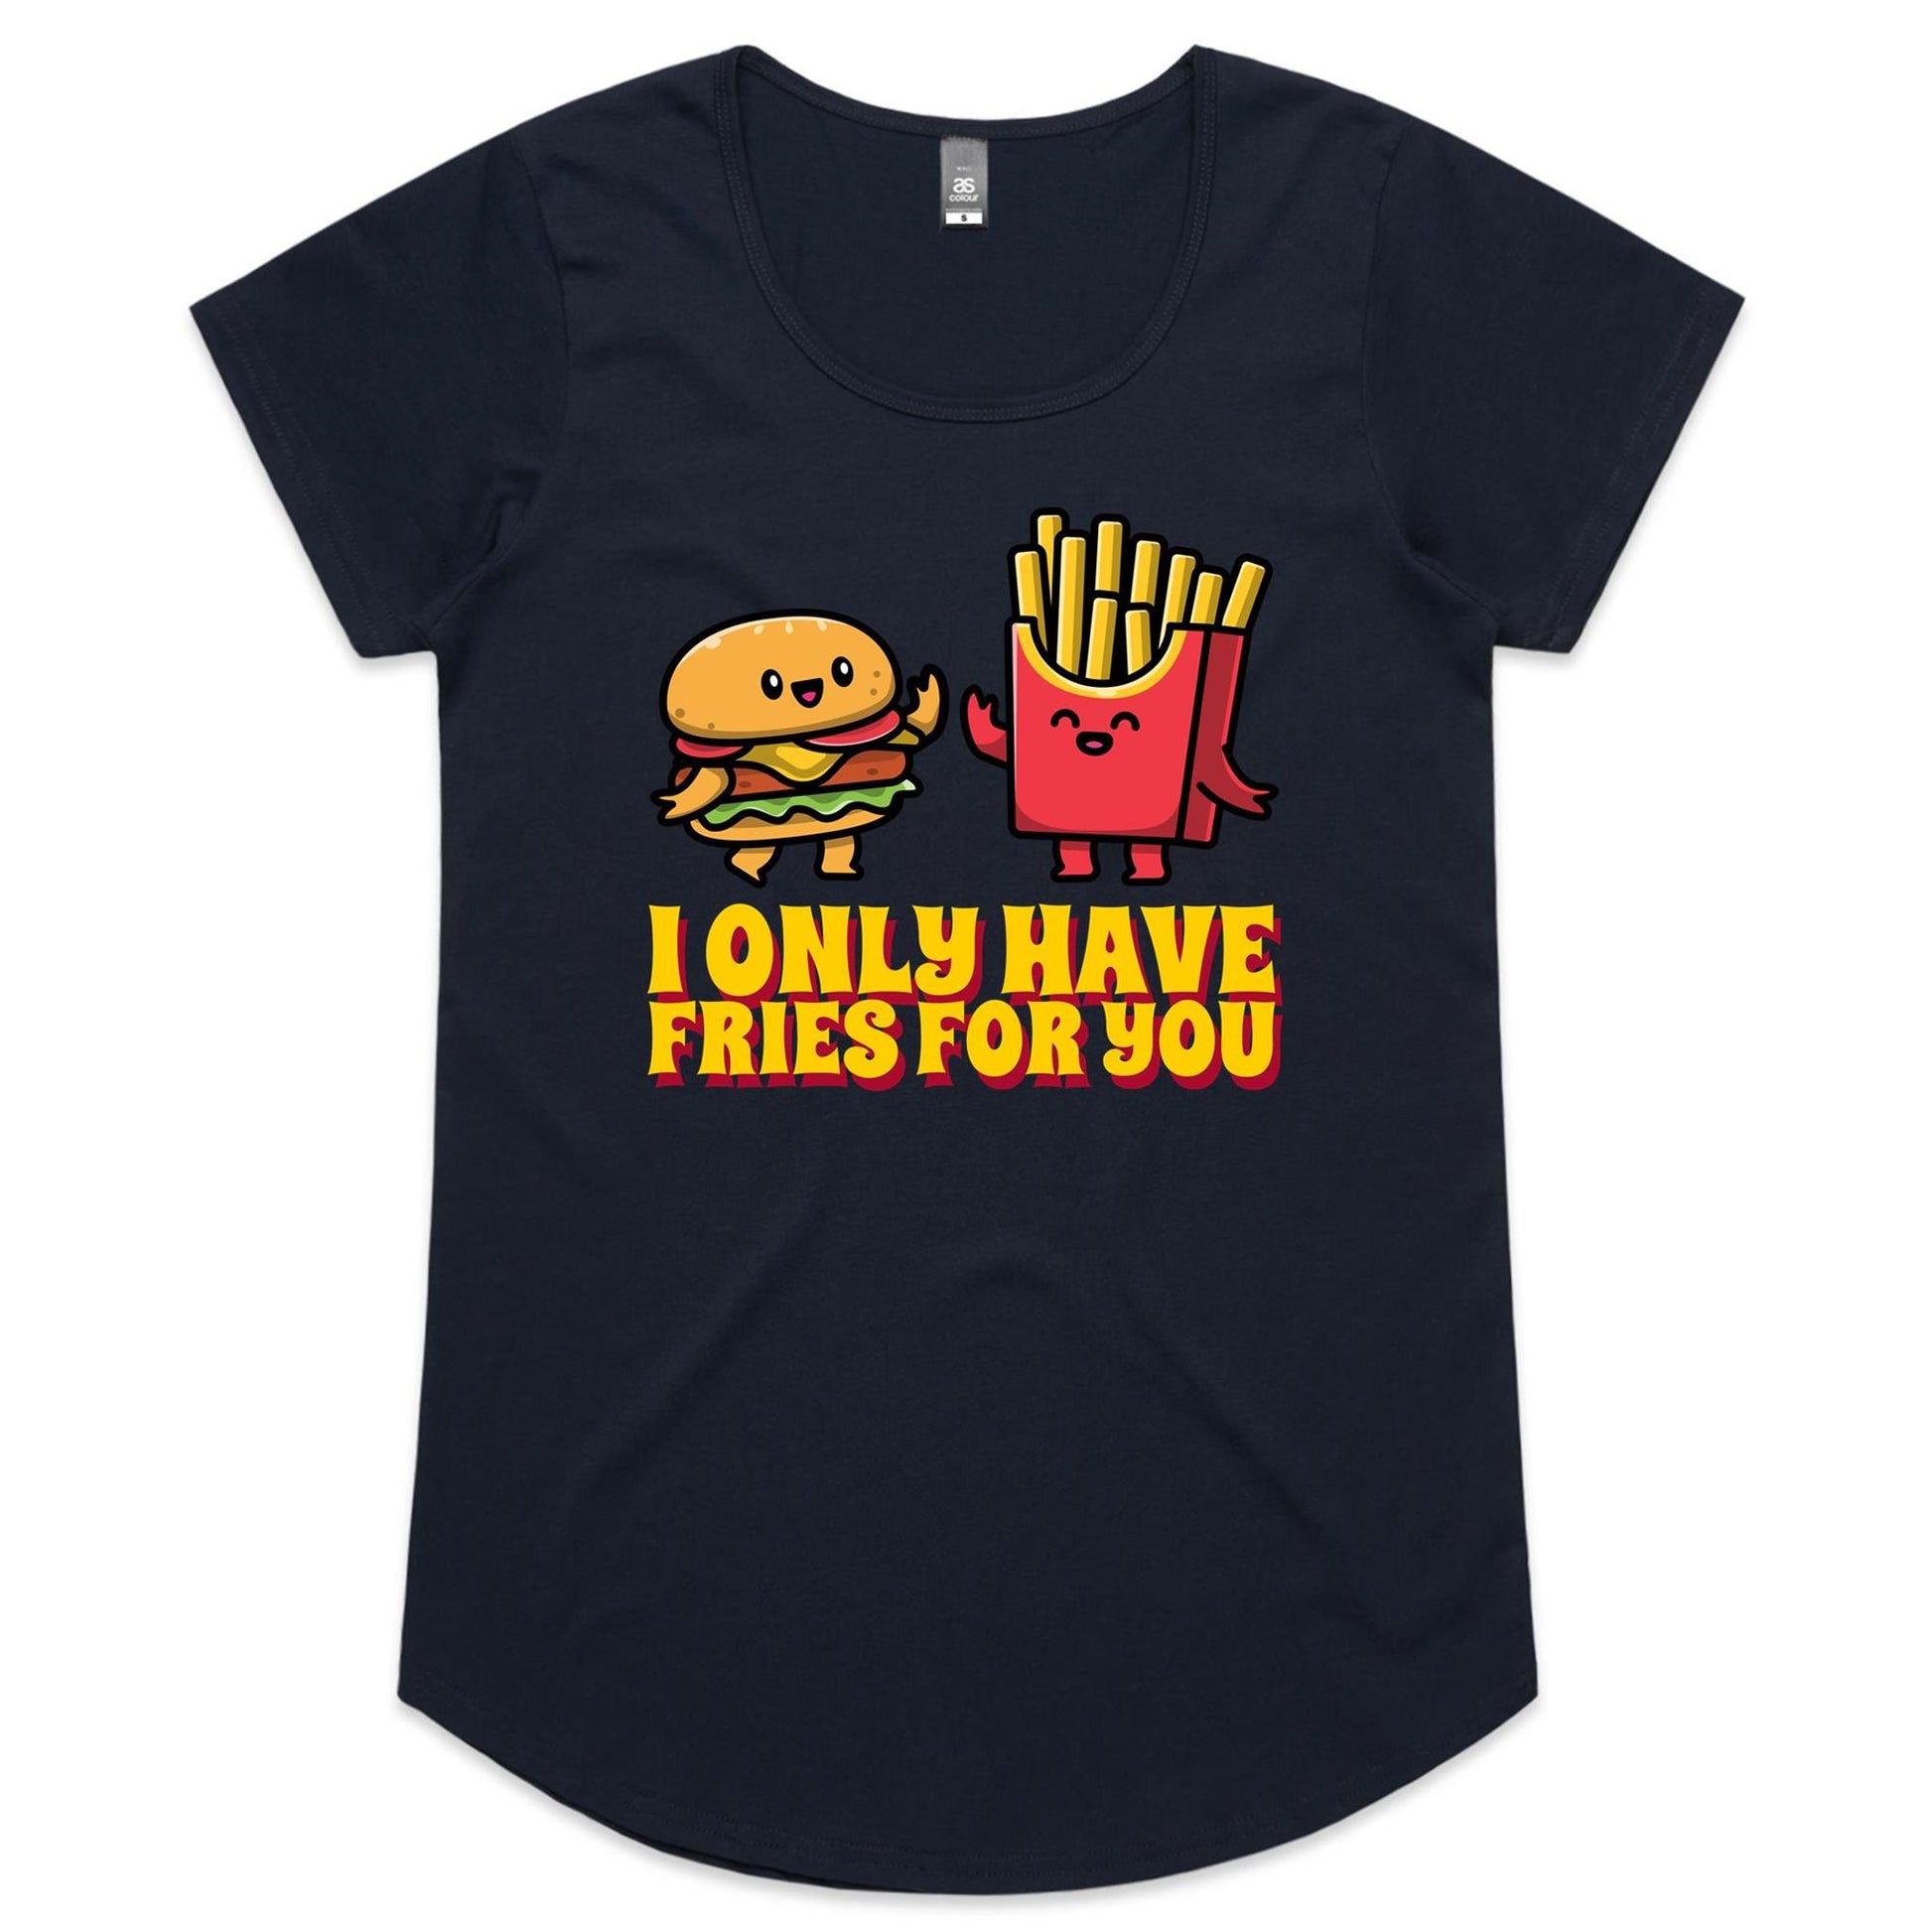 I Only Have Fries For You, Burger And Fries - Womens Scoop Neck T-Shirt Navy Womens Scoop Neck T-shirt